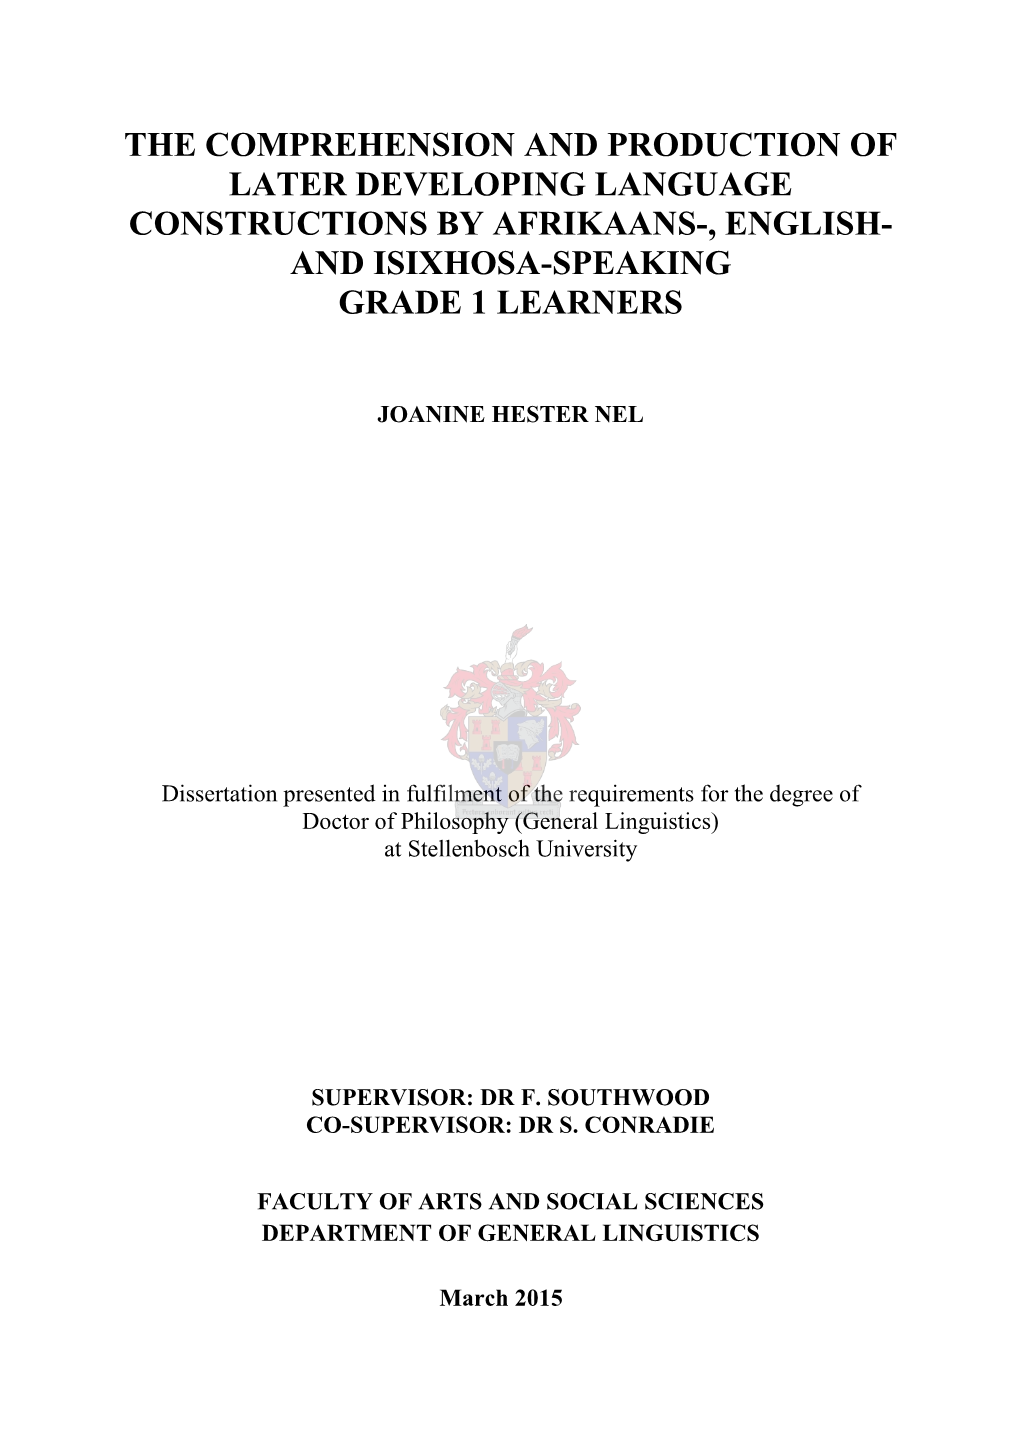 The Comprehension and Production of Later Developing Language Constructions by Afrikaans-, English- and Isixhosa-Speaking Grade 1 Learners